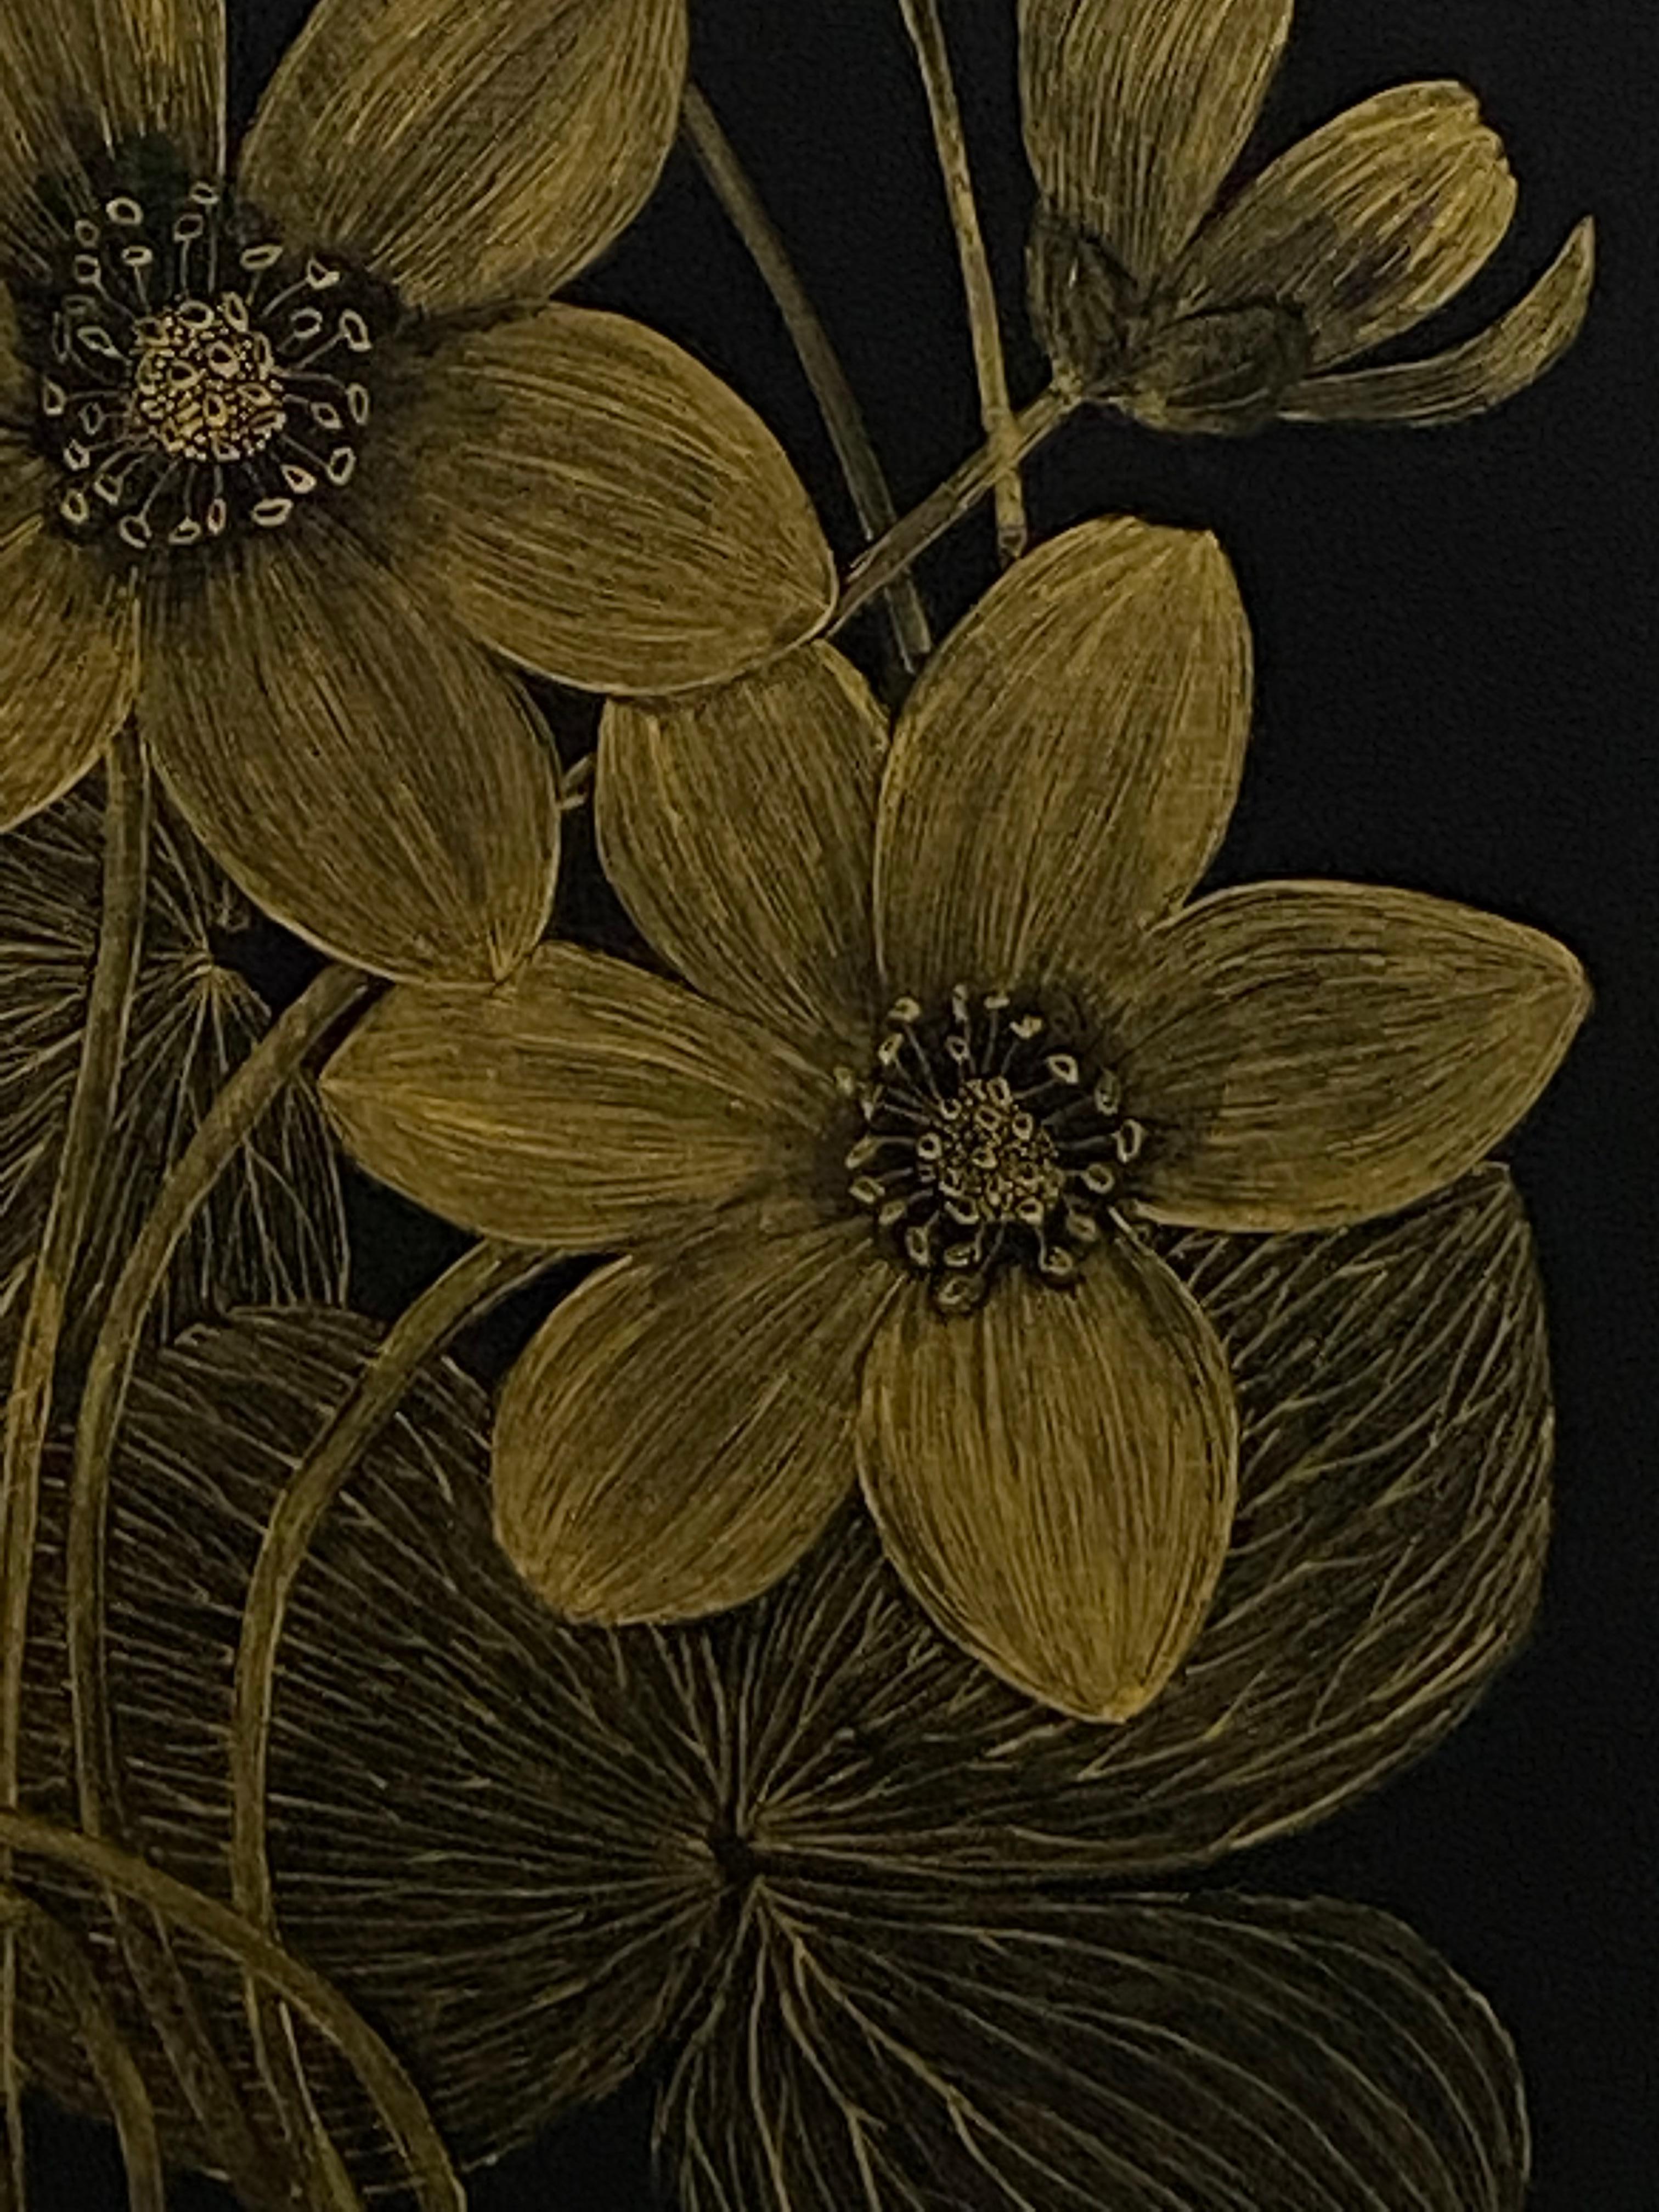 This delicate botanical drawing is made with gold acrylic on cradled panel, painted black. The exploration of ephemerality, and the fragility of a wild anemone flower, its leaves, petals and buds are the focus of this painting by Margot Glass. The